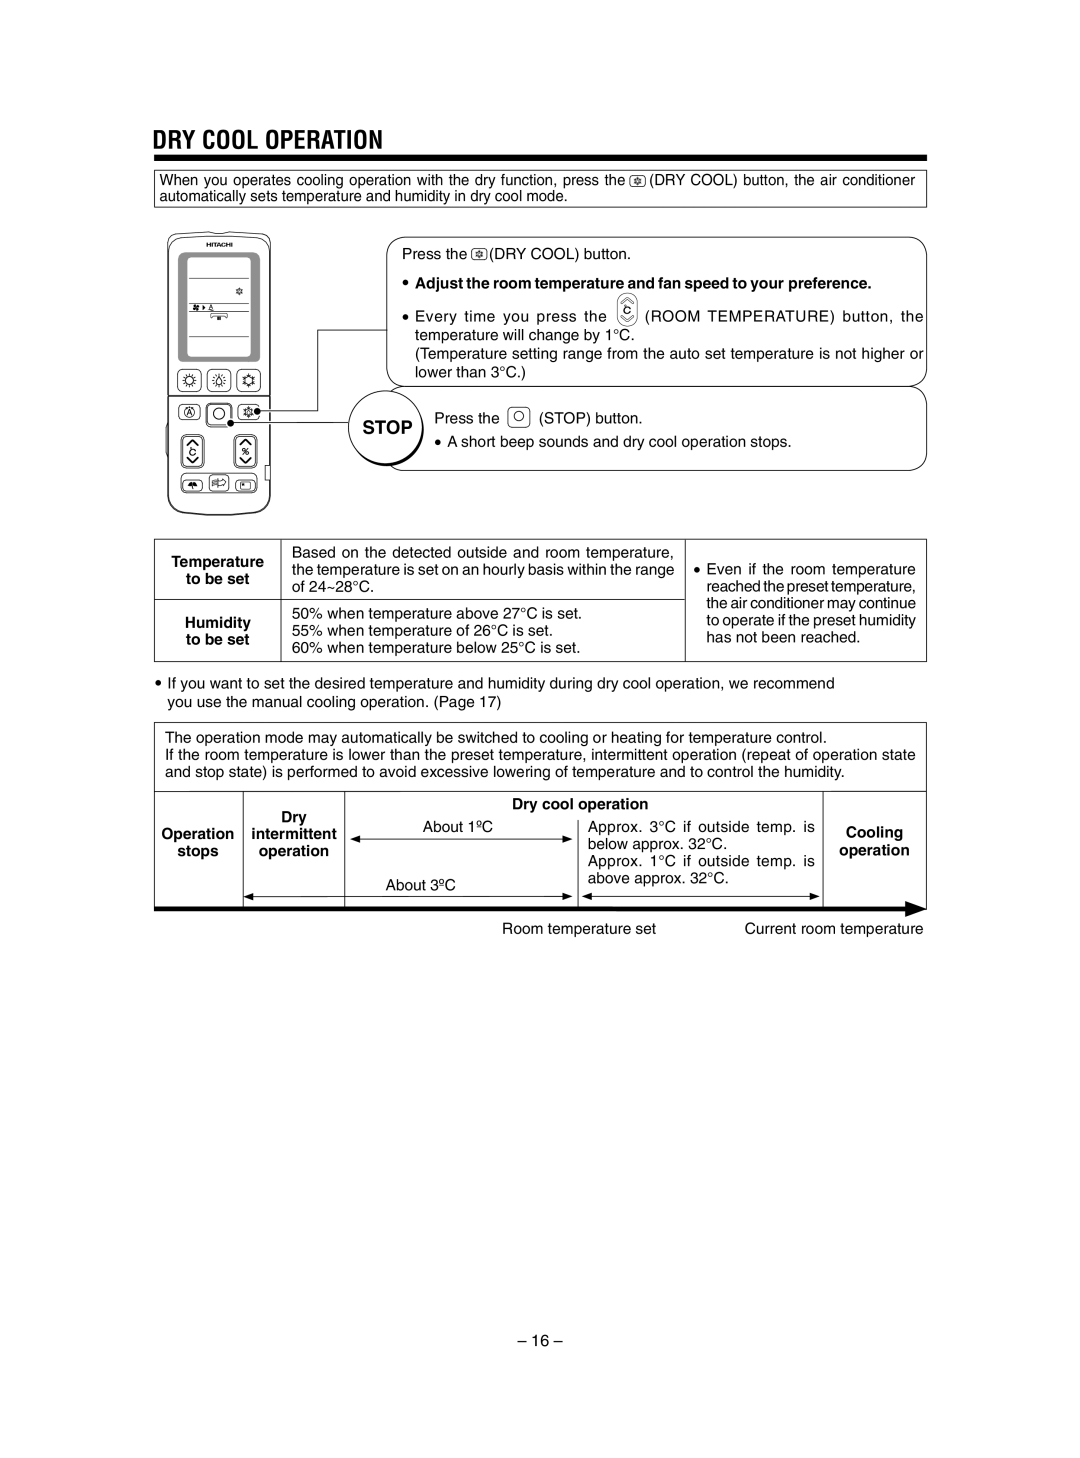 Hitachi RAS-SX13HAK / RAC-SX13HAK, RAS-SX10HAK / RAC-SX10HAK instruction manual Dry Cool Operation, Stop 